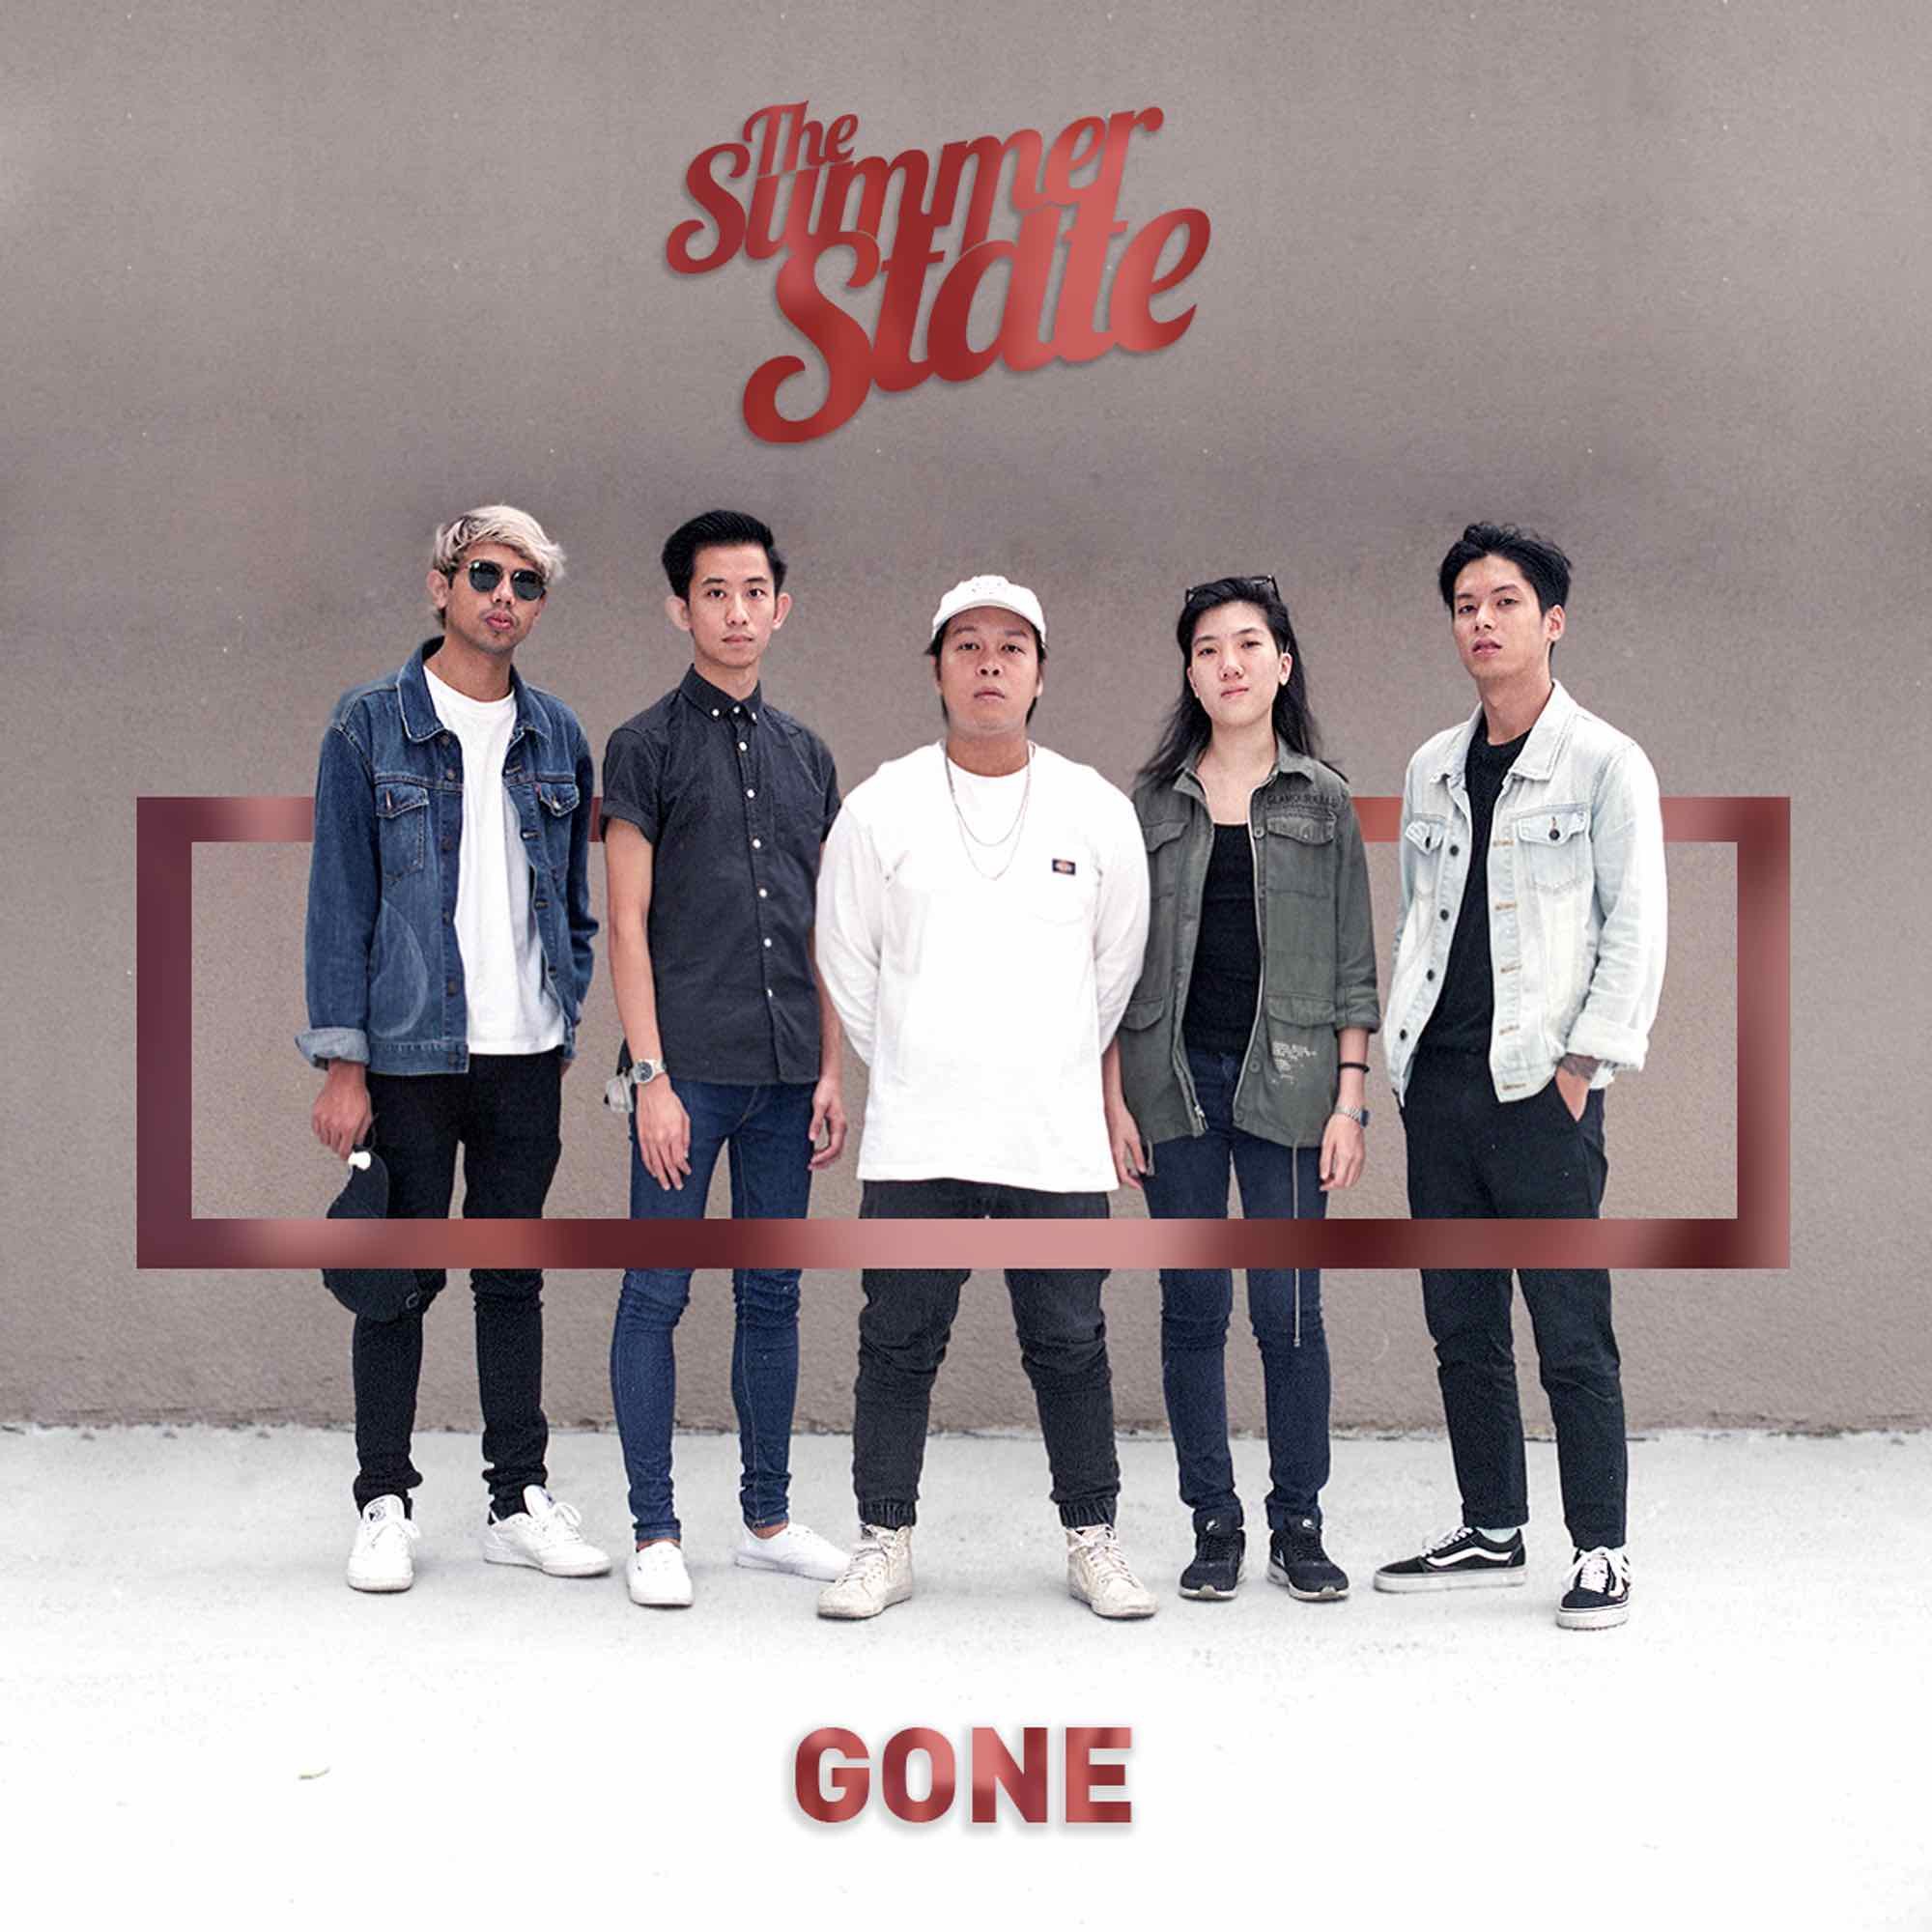 Pop/rock band from Singapore. ✉️: thesummerstate[at]http://gmail[dot]com Check out our single Gone: https://t.co/7c48Dl3RxN